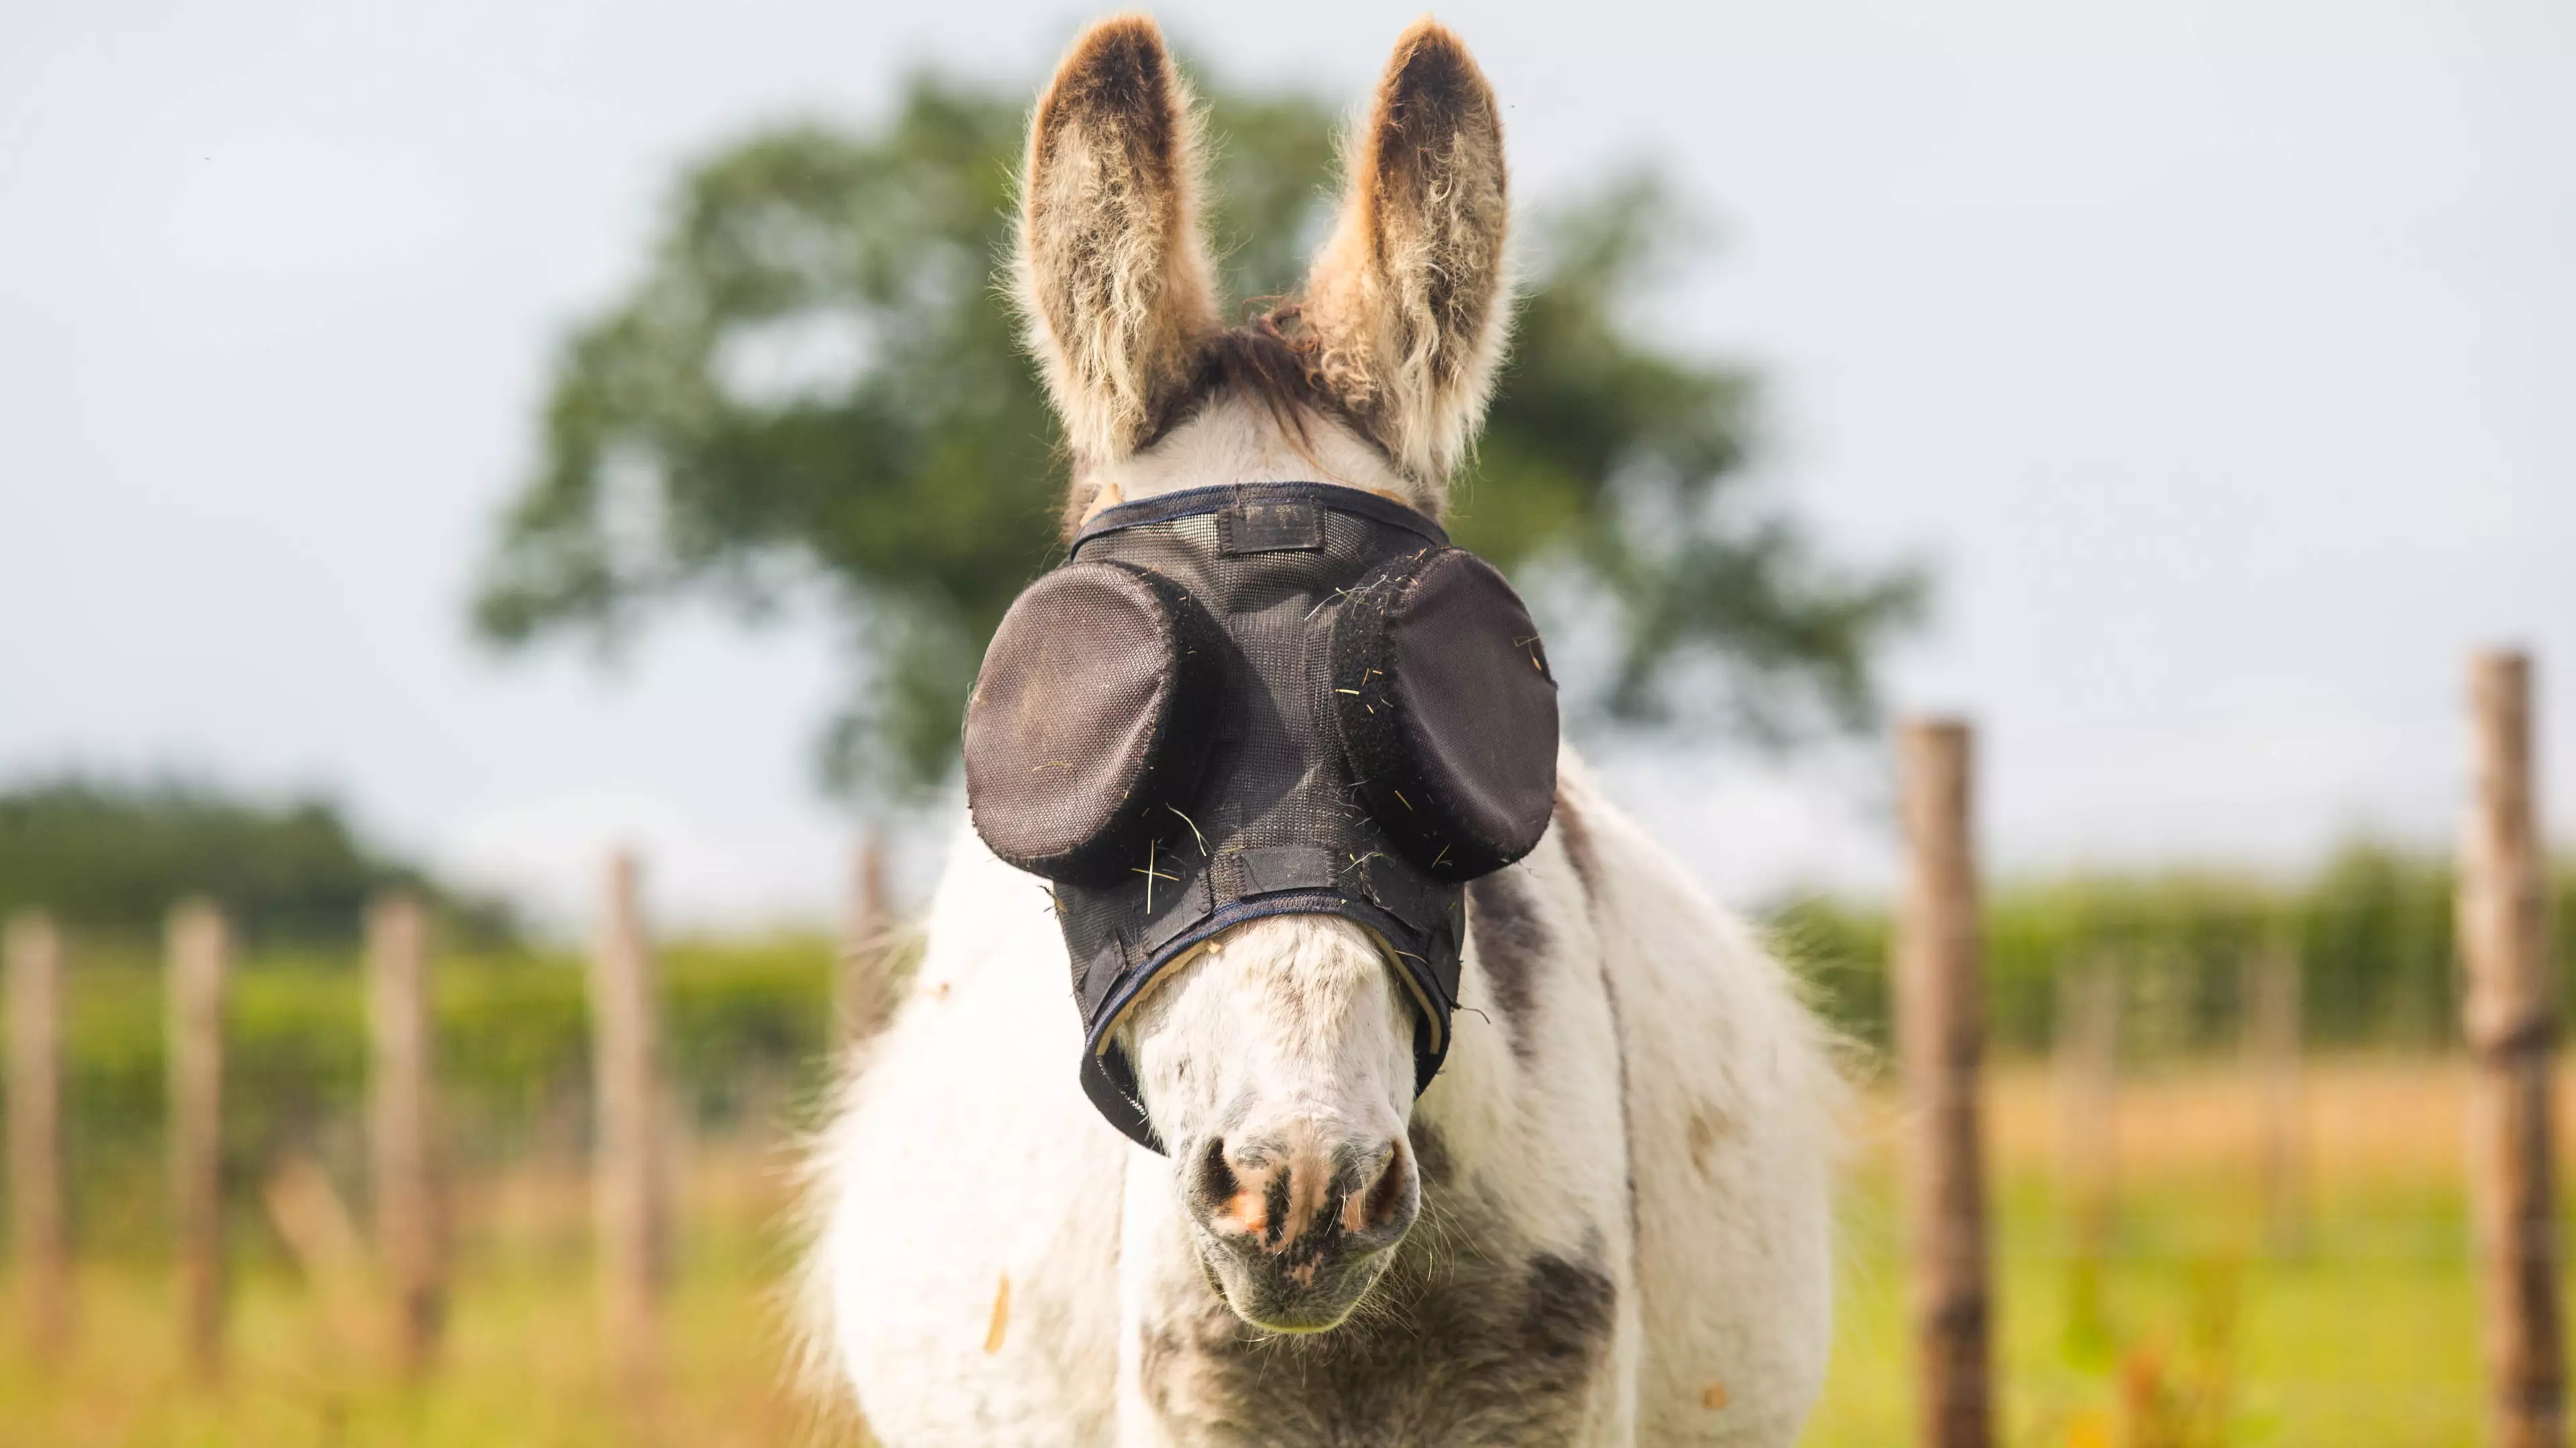 Donkey Given Special Sunglasses After Being Blinded In Freak Accident